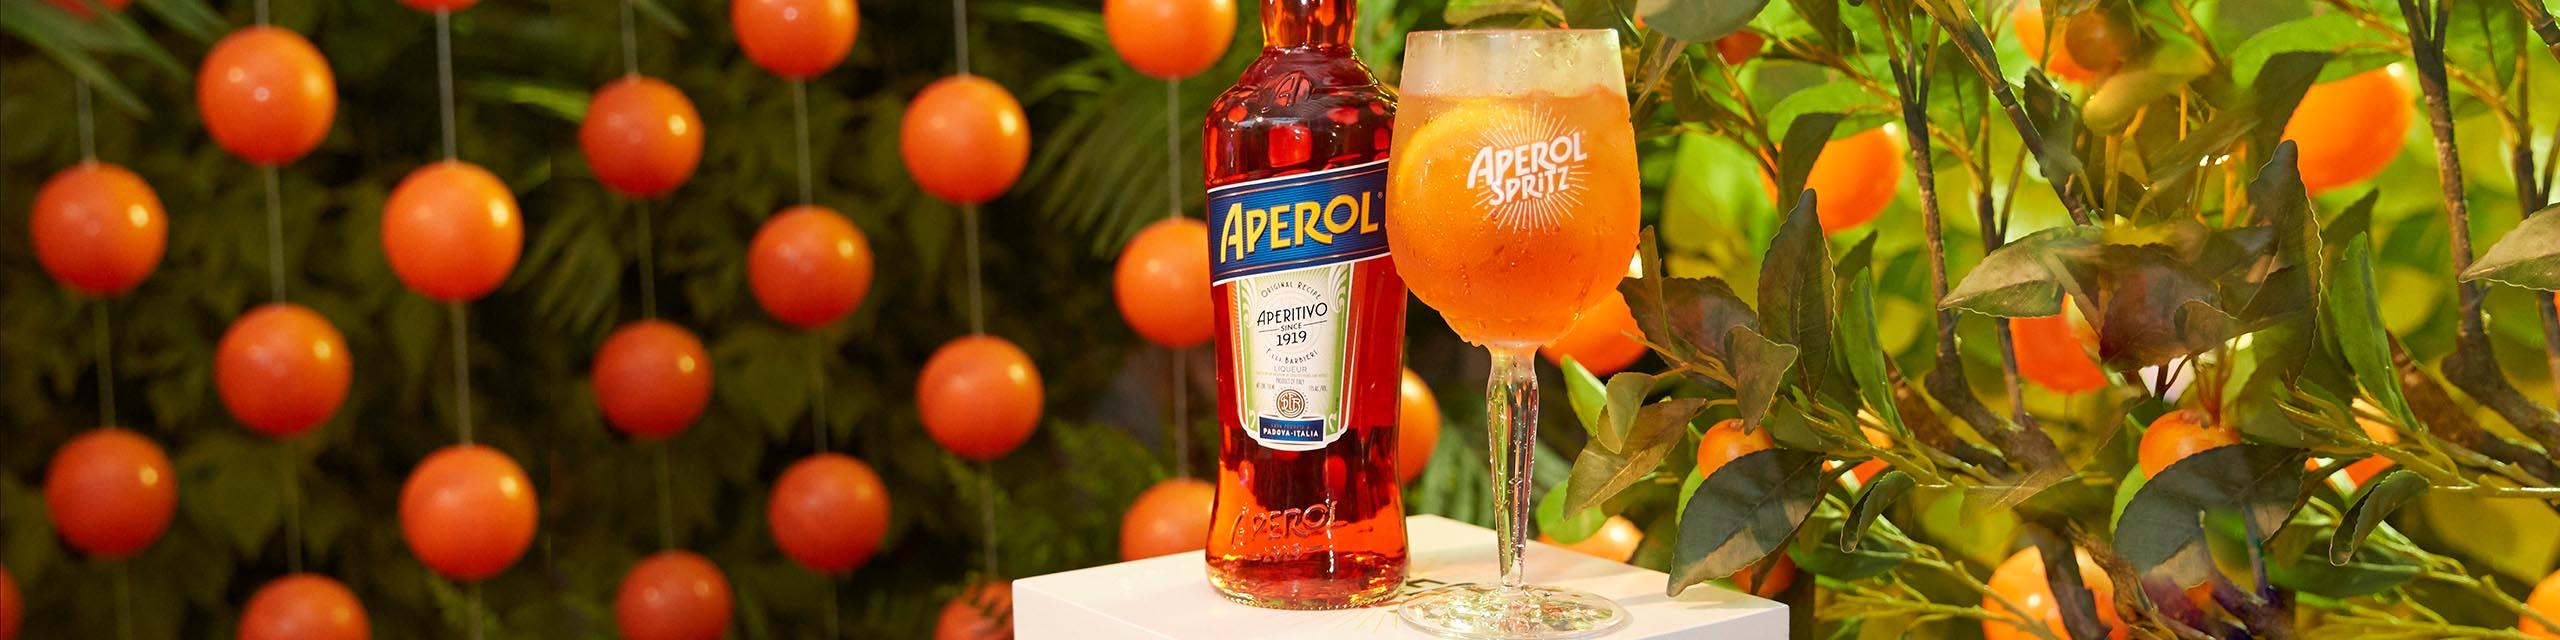 Aperol is the perfect aperitif. Bright orange in color, its unique bittersweet taste is derived from a secret recipe that has remained unchanged since its creation. Aperol was created in 1919 in Padova, Italy, by the Barbieri Brothers who launched the revolutionary idea of an aperitif with an alcohol content of only 11 percent. Their stylish and versatile creation inspired a cocktail which has become the signature drink of Italy: the Aperol Spritz. Buy Aperol online now from nearby liquor stores via Minibar Delivery. 